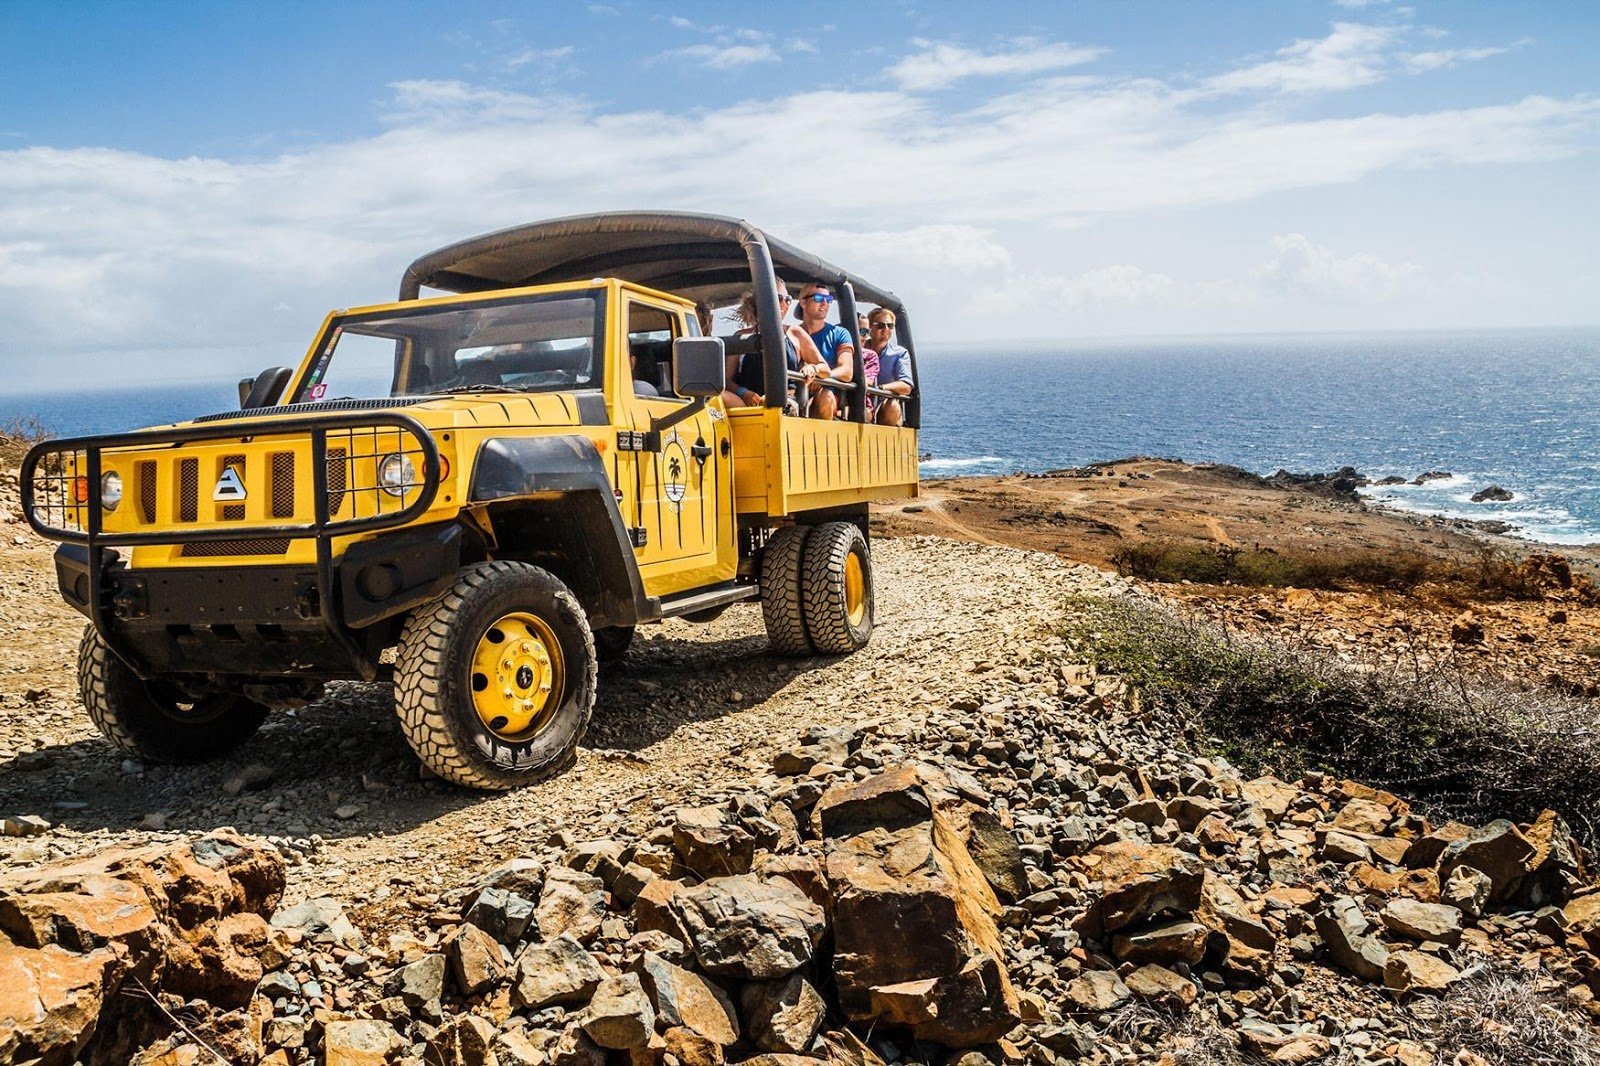 How To Choose ‘everything Best’ For Your First Off-Roading Trip